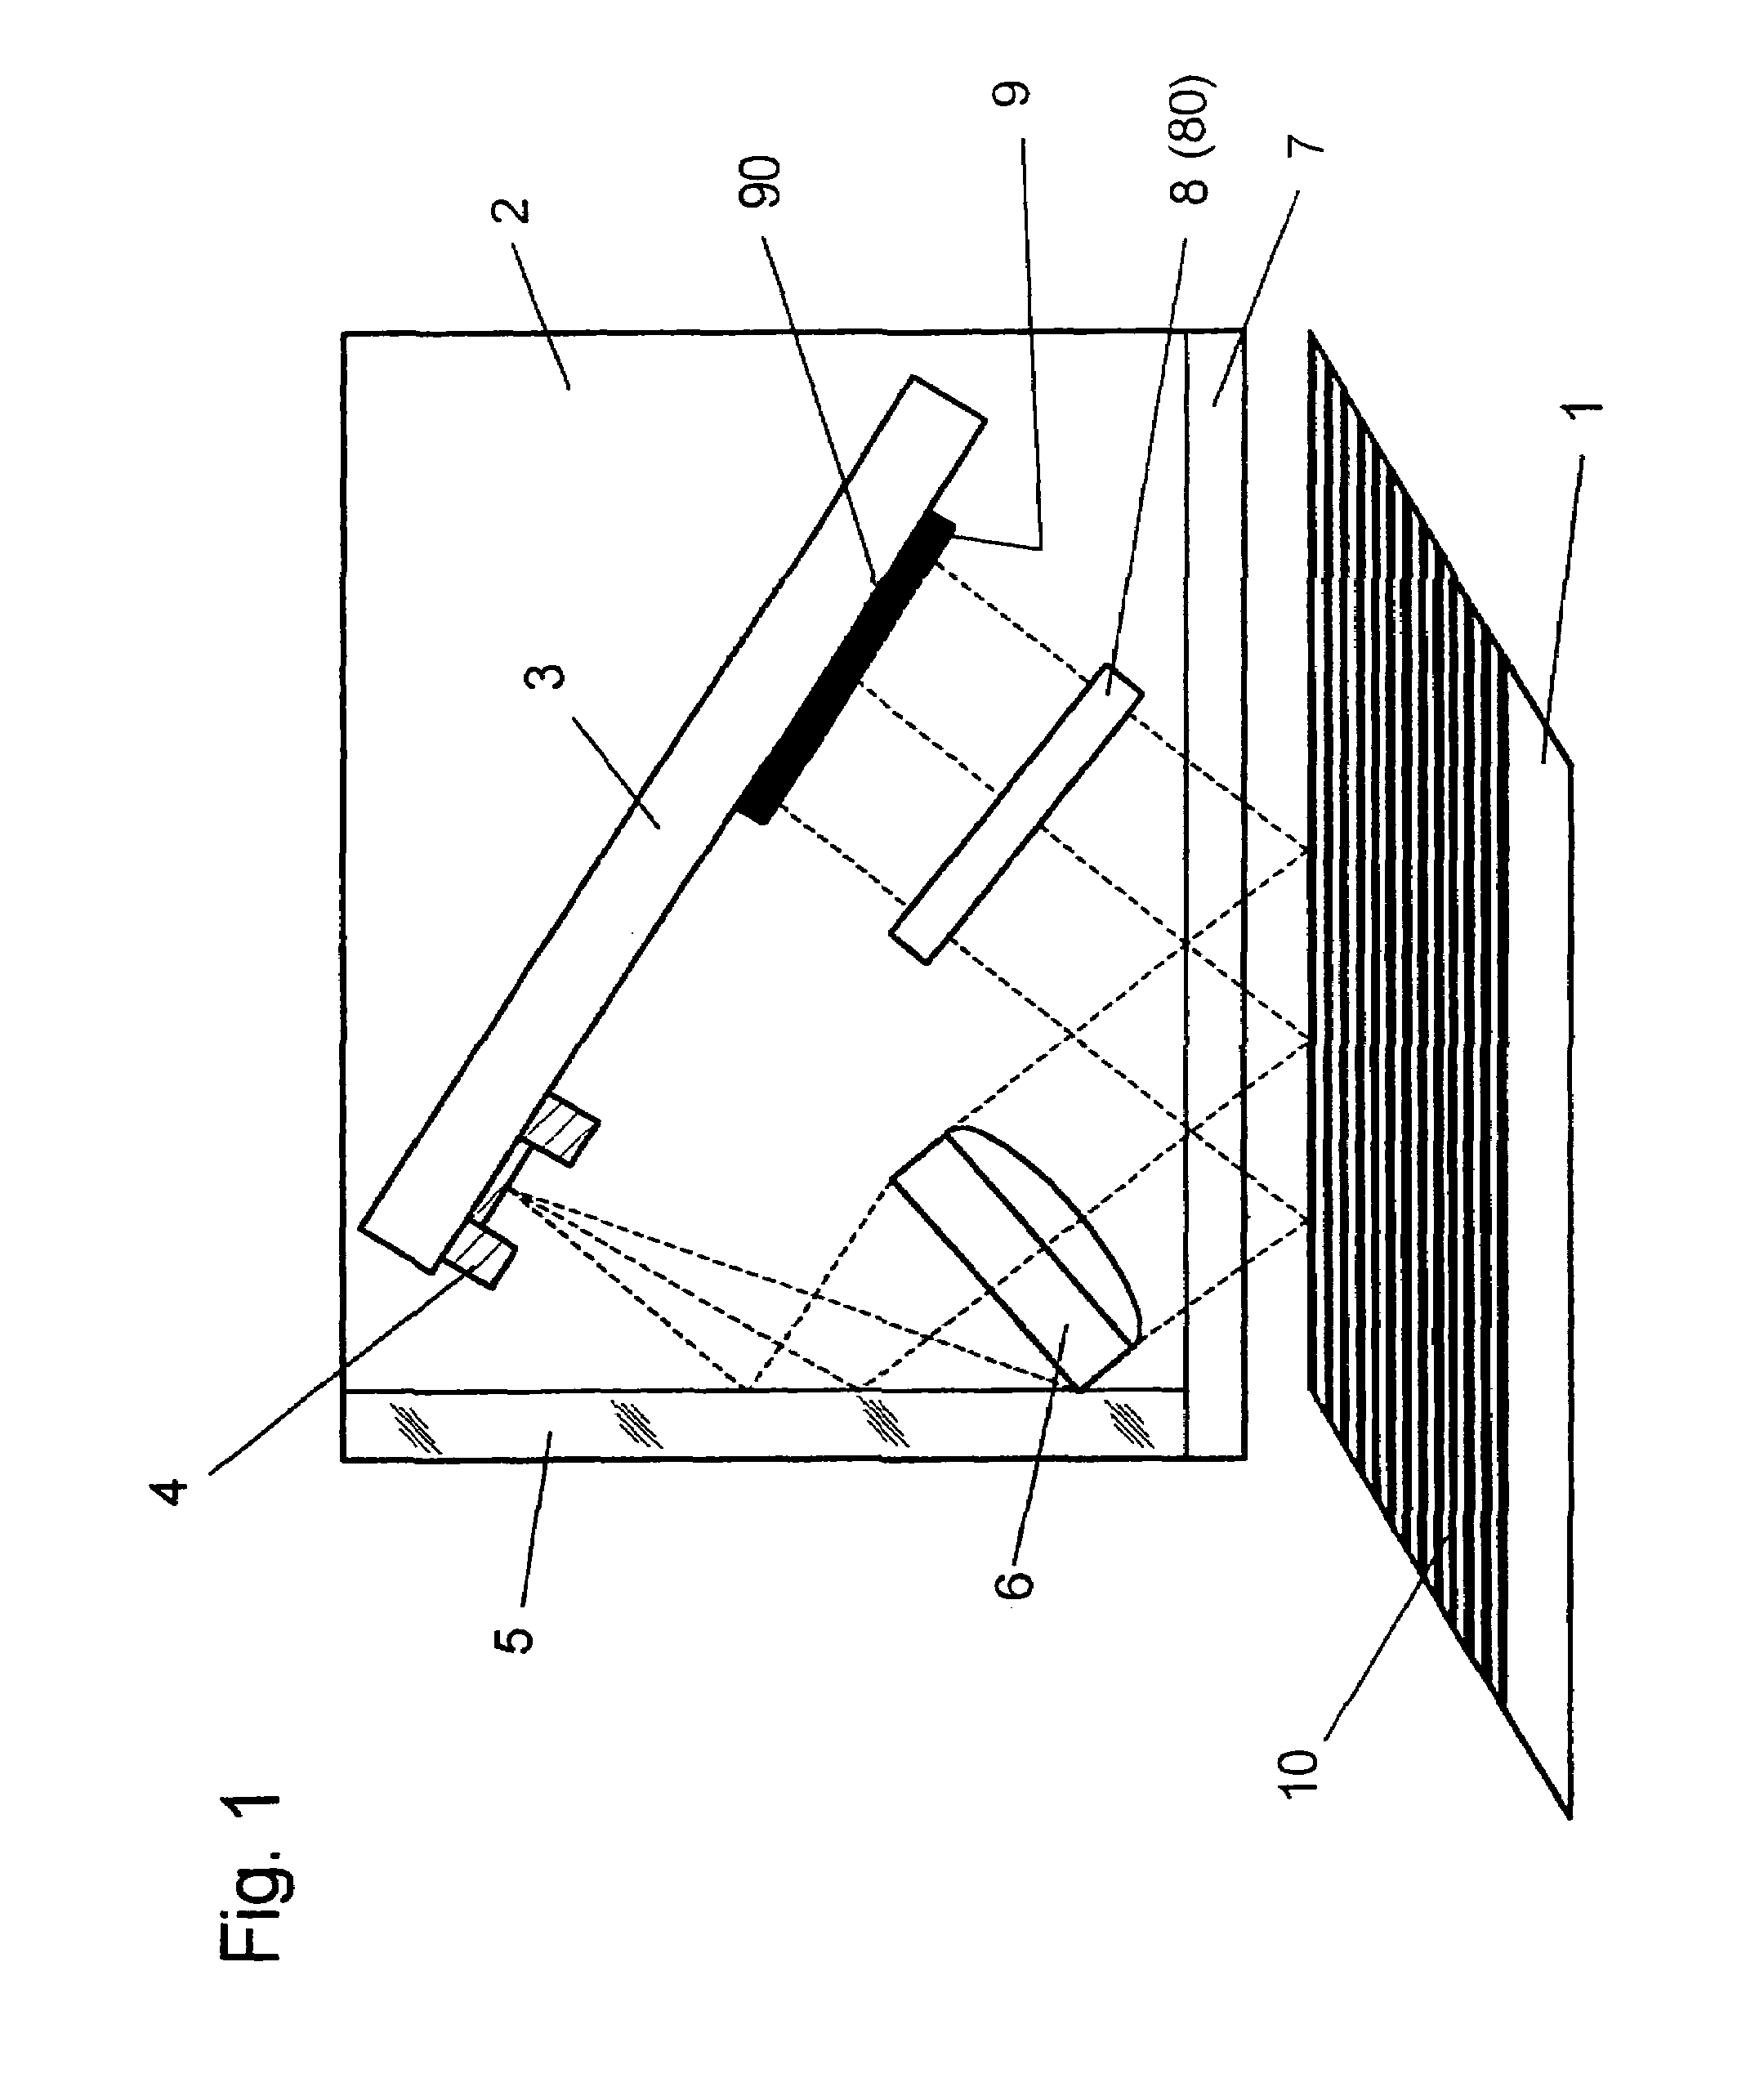 Optical position measuring device